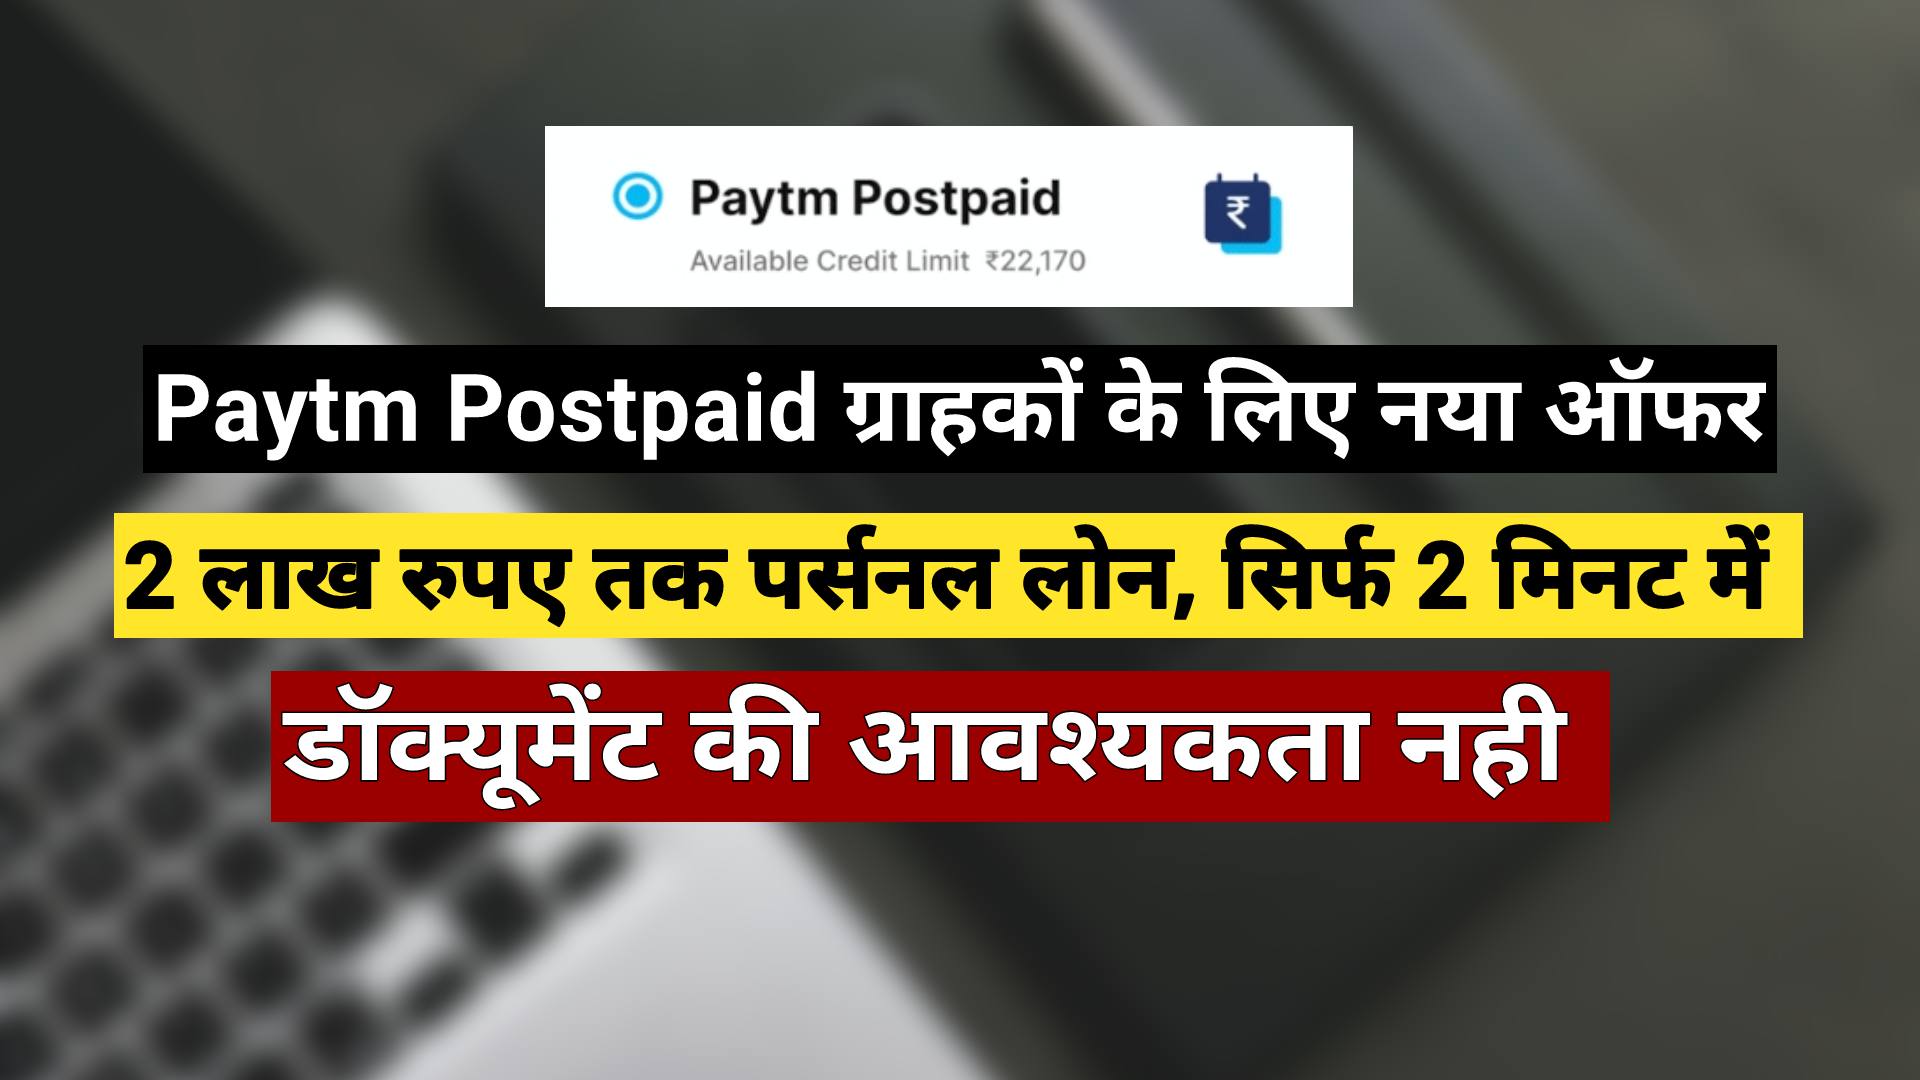 Paytm postpaid personal loan offer